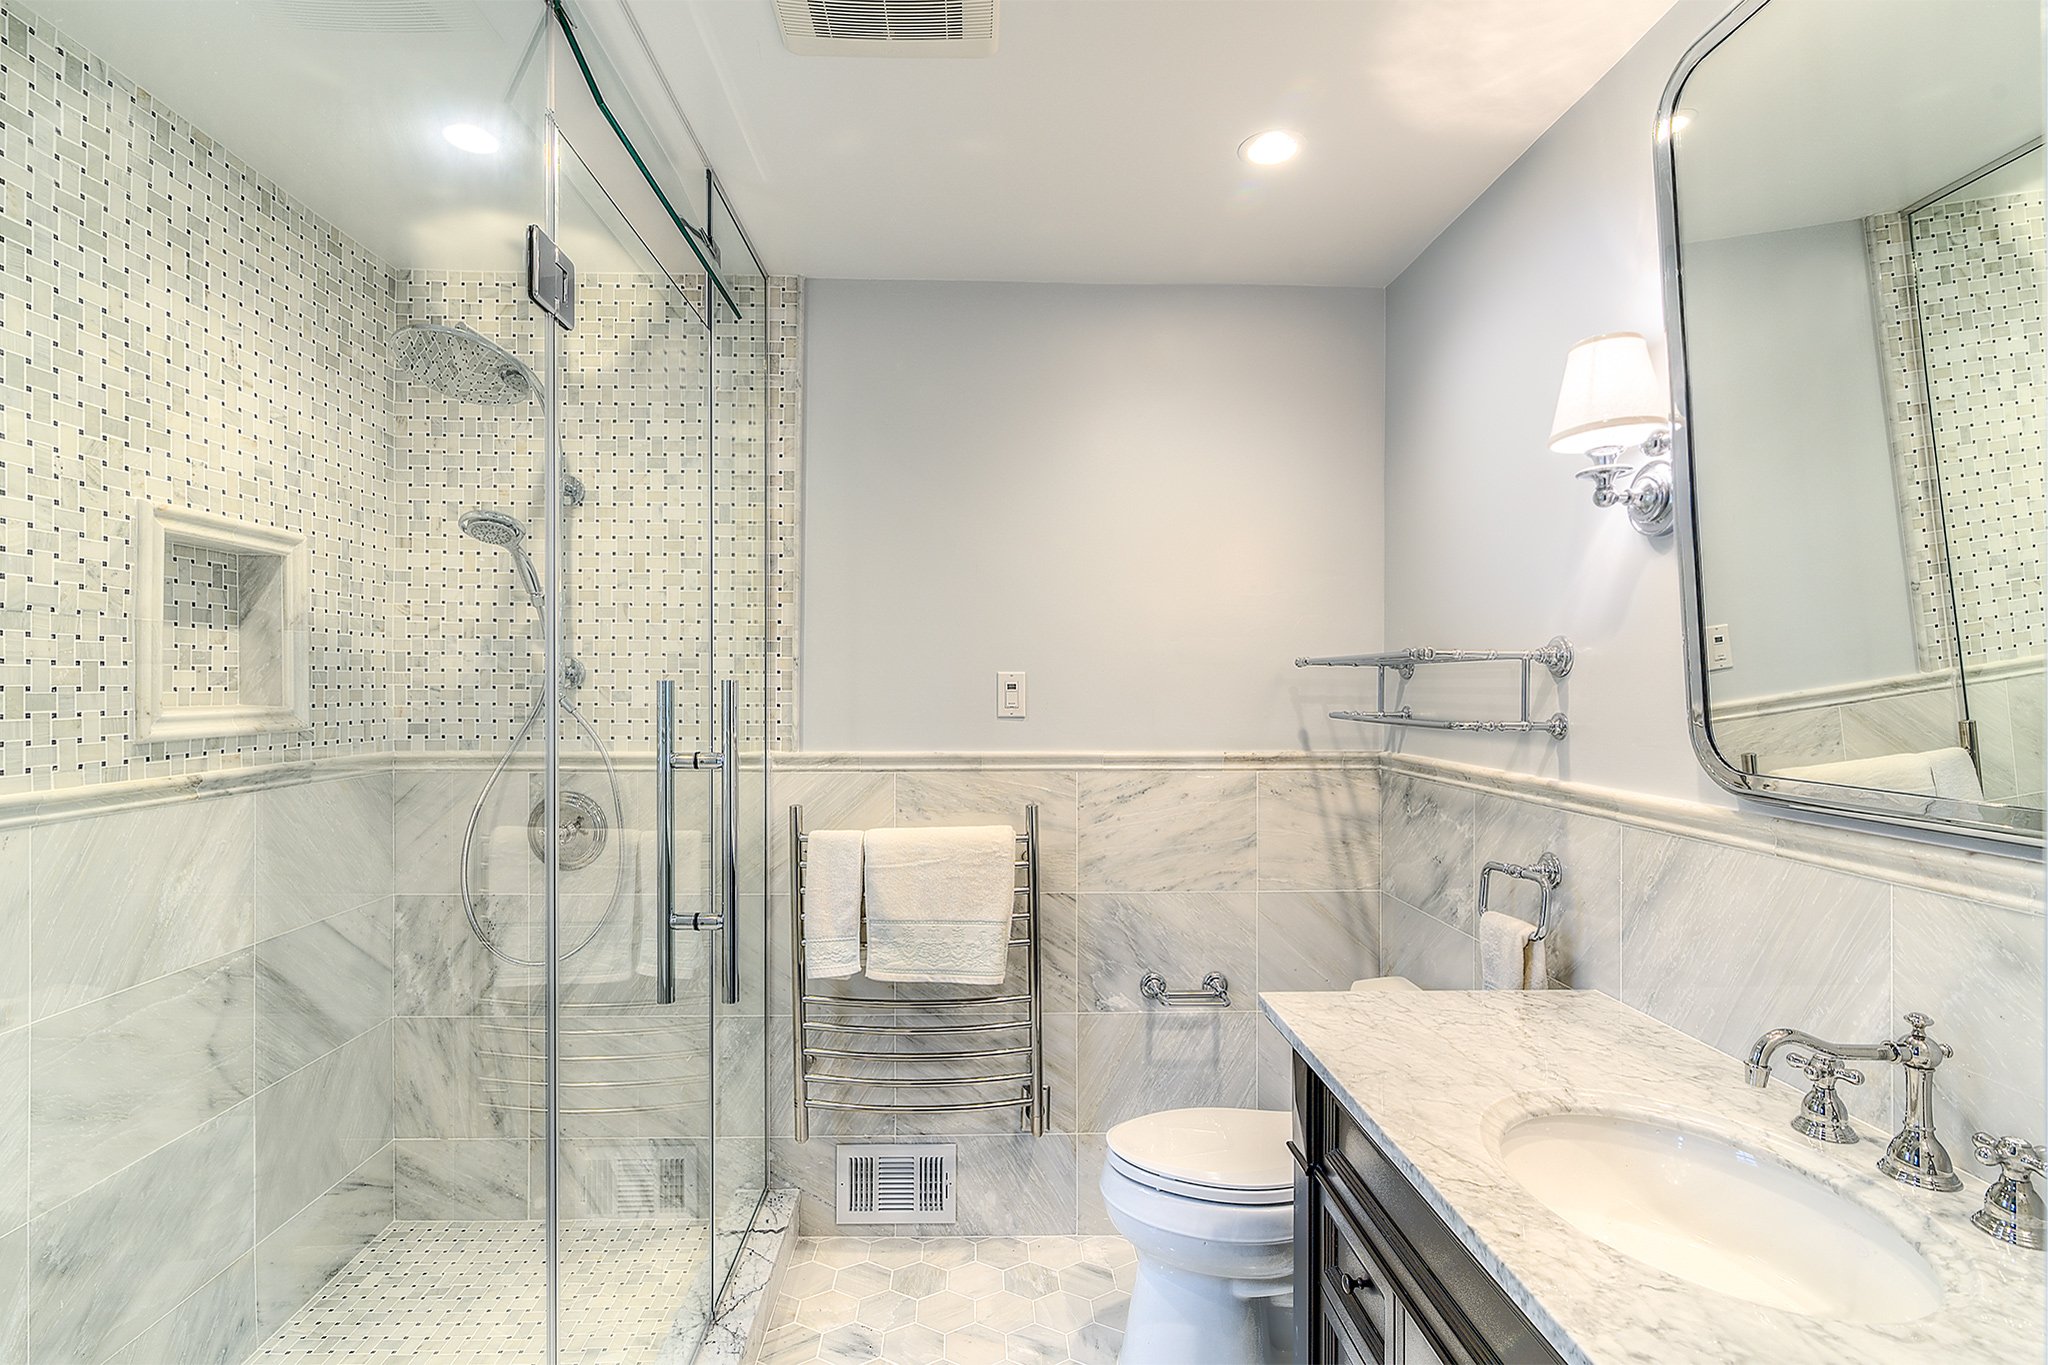 How much is a complete bathroom remodel